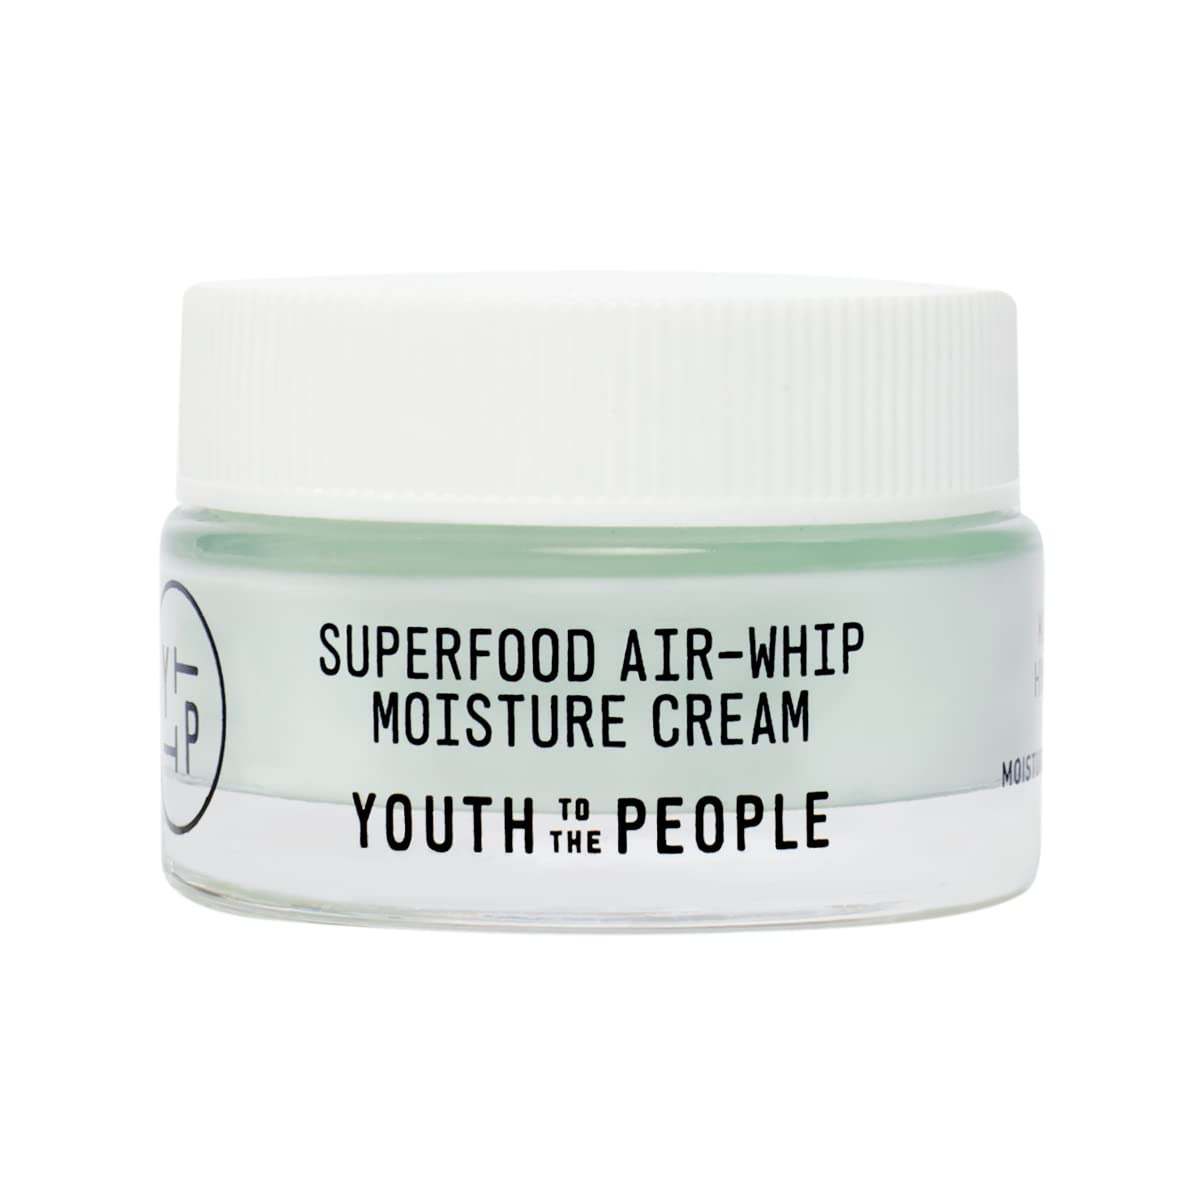 Youth To The People Air-Whip Moisture Face Cream - Gel Moisturizer & Face Primer - Lightweight Green Tea + Hydrating Hyaluronic Acid Moisturizer for Sensitive Skin, Travel Size (0.5oz)